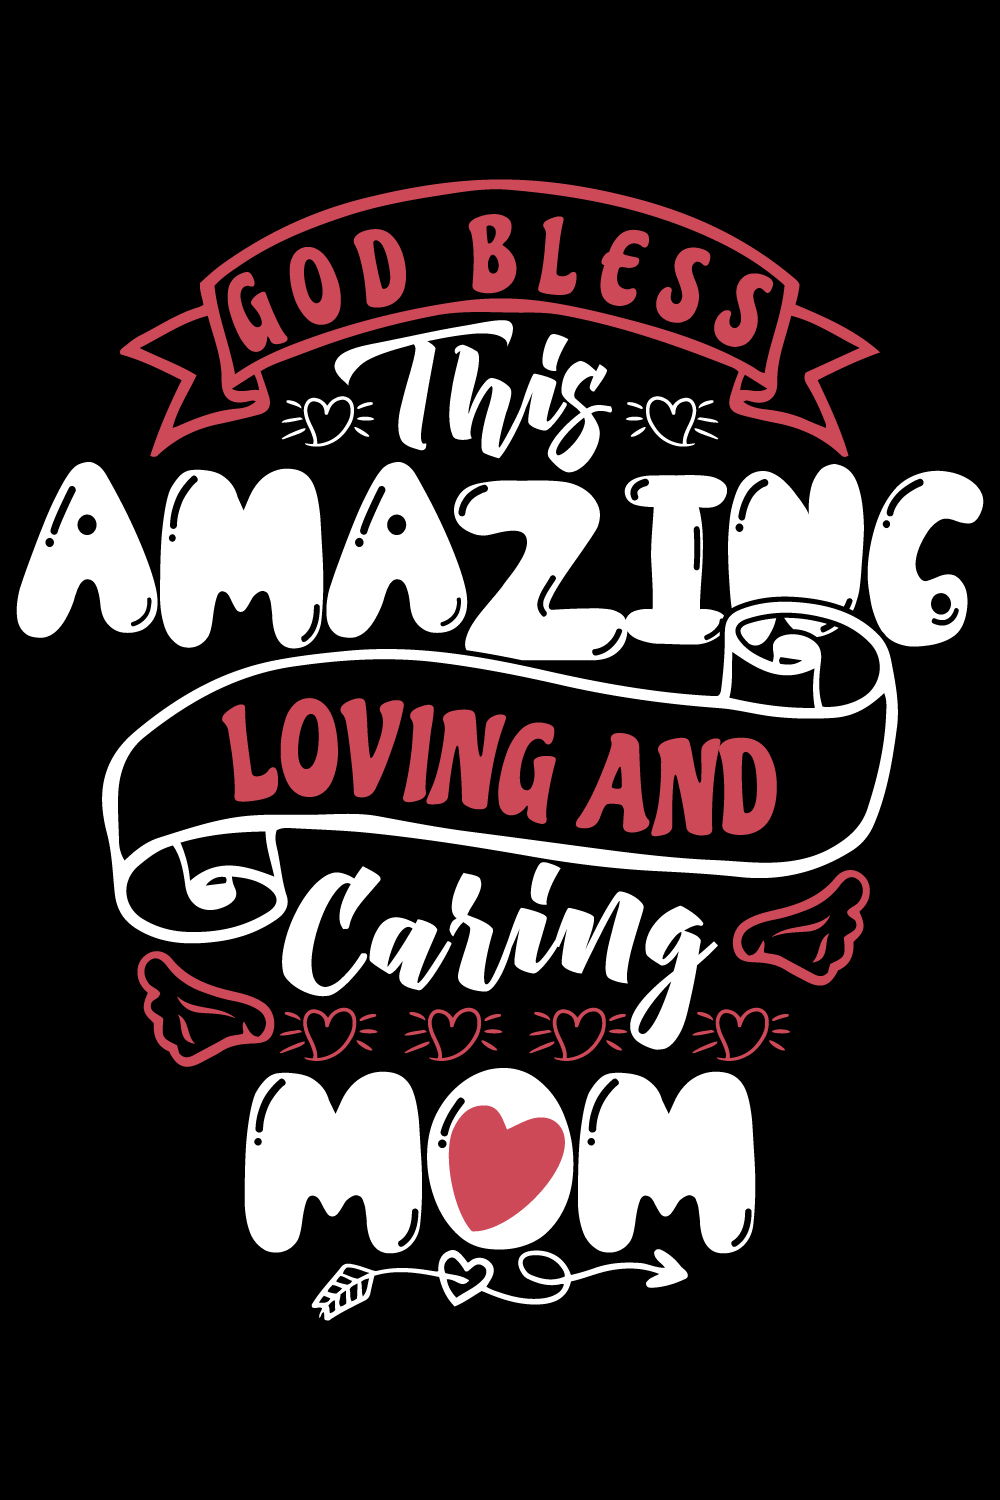 Loving and Caring mom t shirt pinterest preview image.